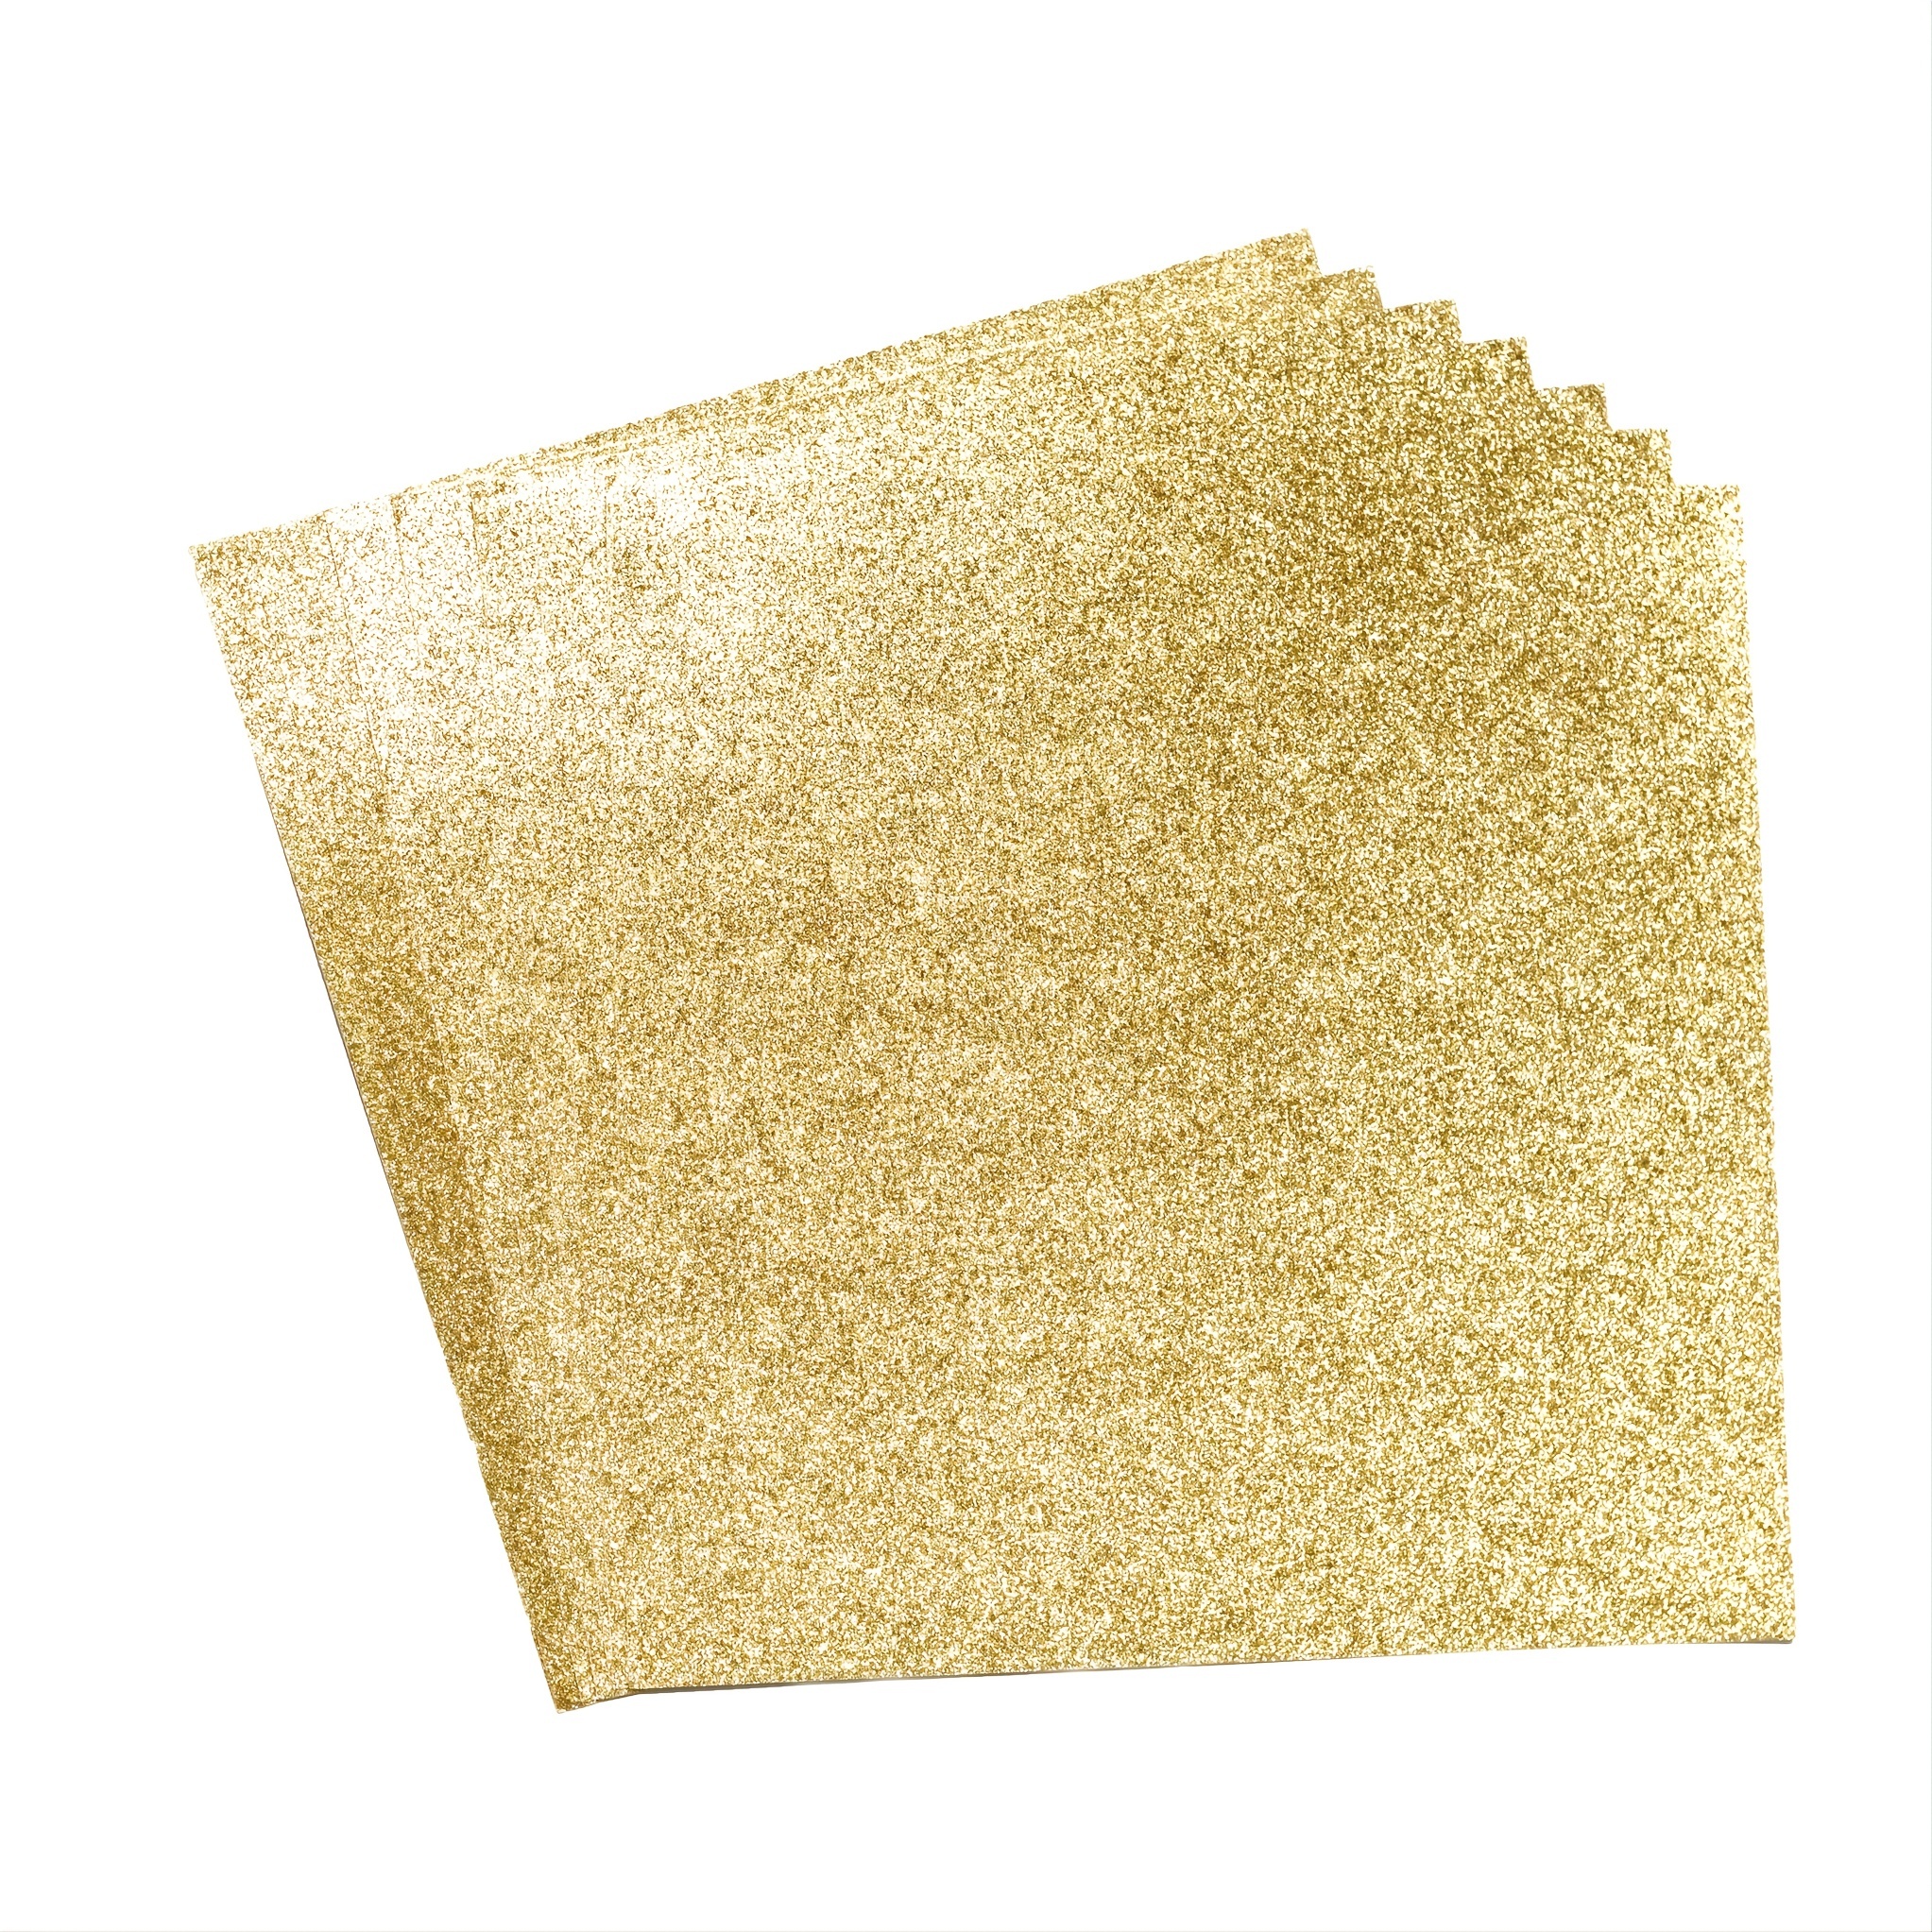 Crafasso No-Shed fine glitter cardstock, 12 x 12 300gms, 15 sheets, Gold